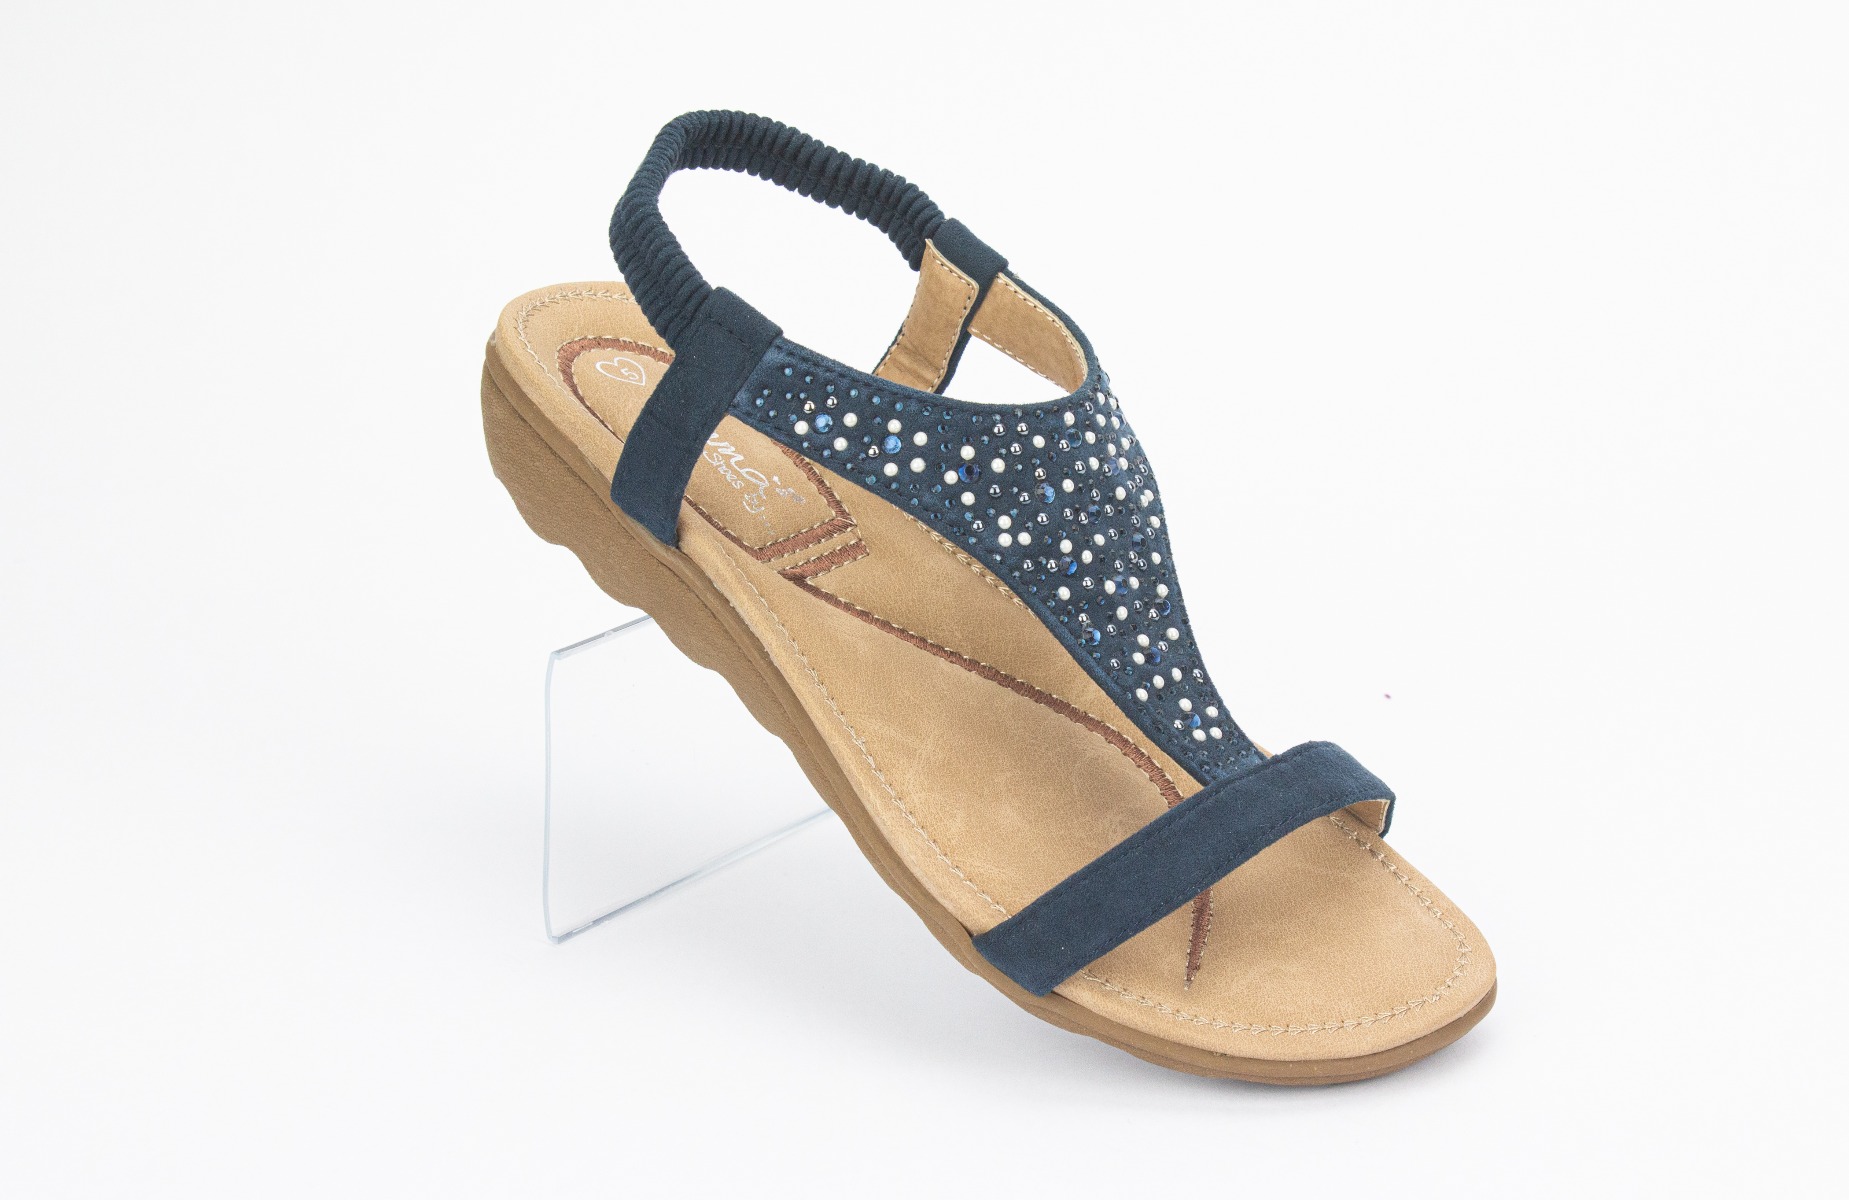 A pair of navy sandals with rhinestones.